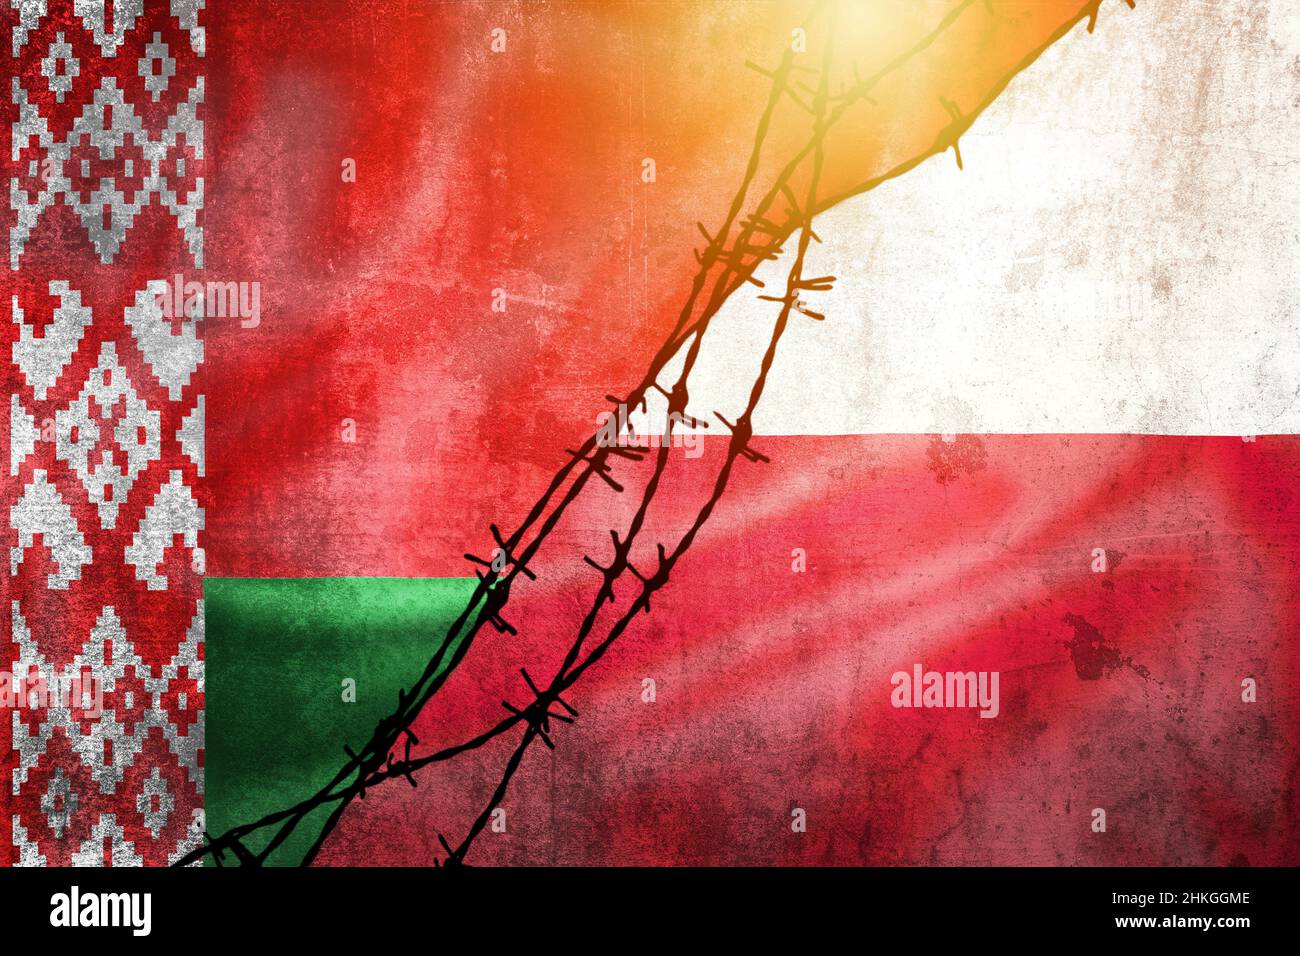 Grunge flags of Belarus and Poland divided by barb wire and sun haze illustration, concept of tense relations in migrant border crisis Stock Photo